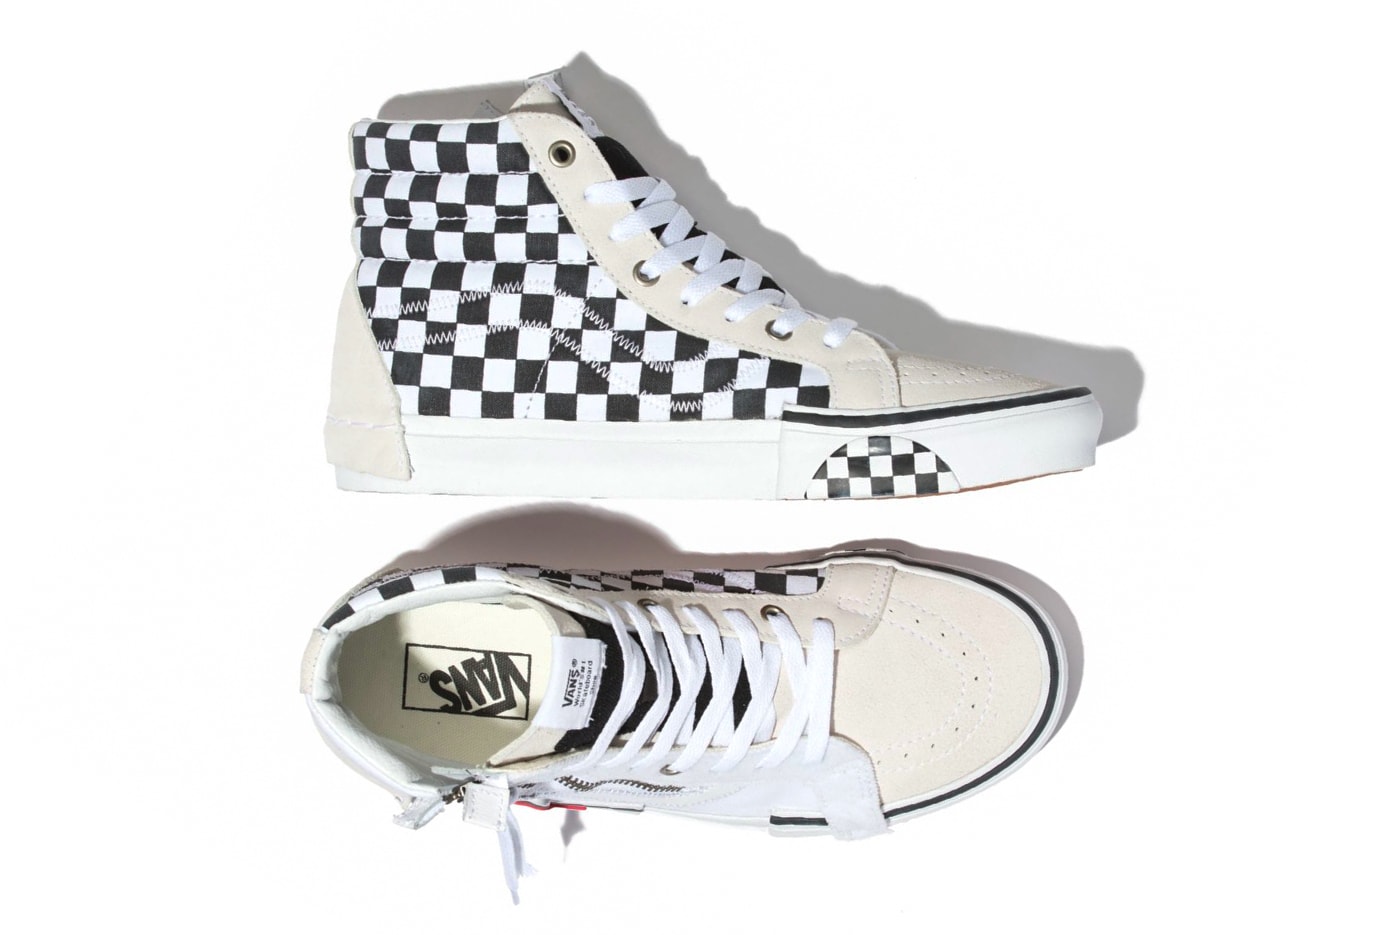 Vans Sk8 Hi Deconstructed White Release Info Date Reissue checkerboard black cap Inside Out